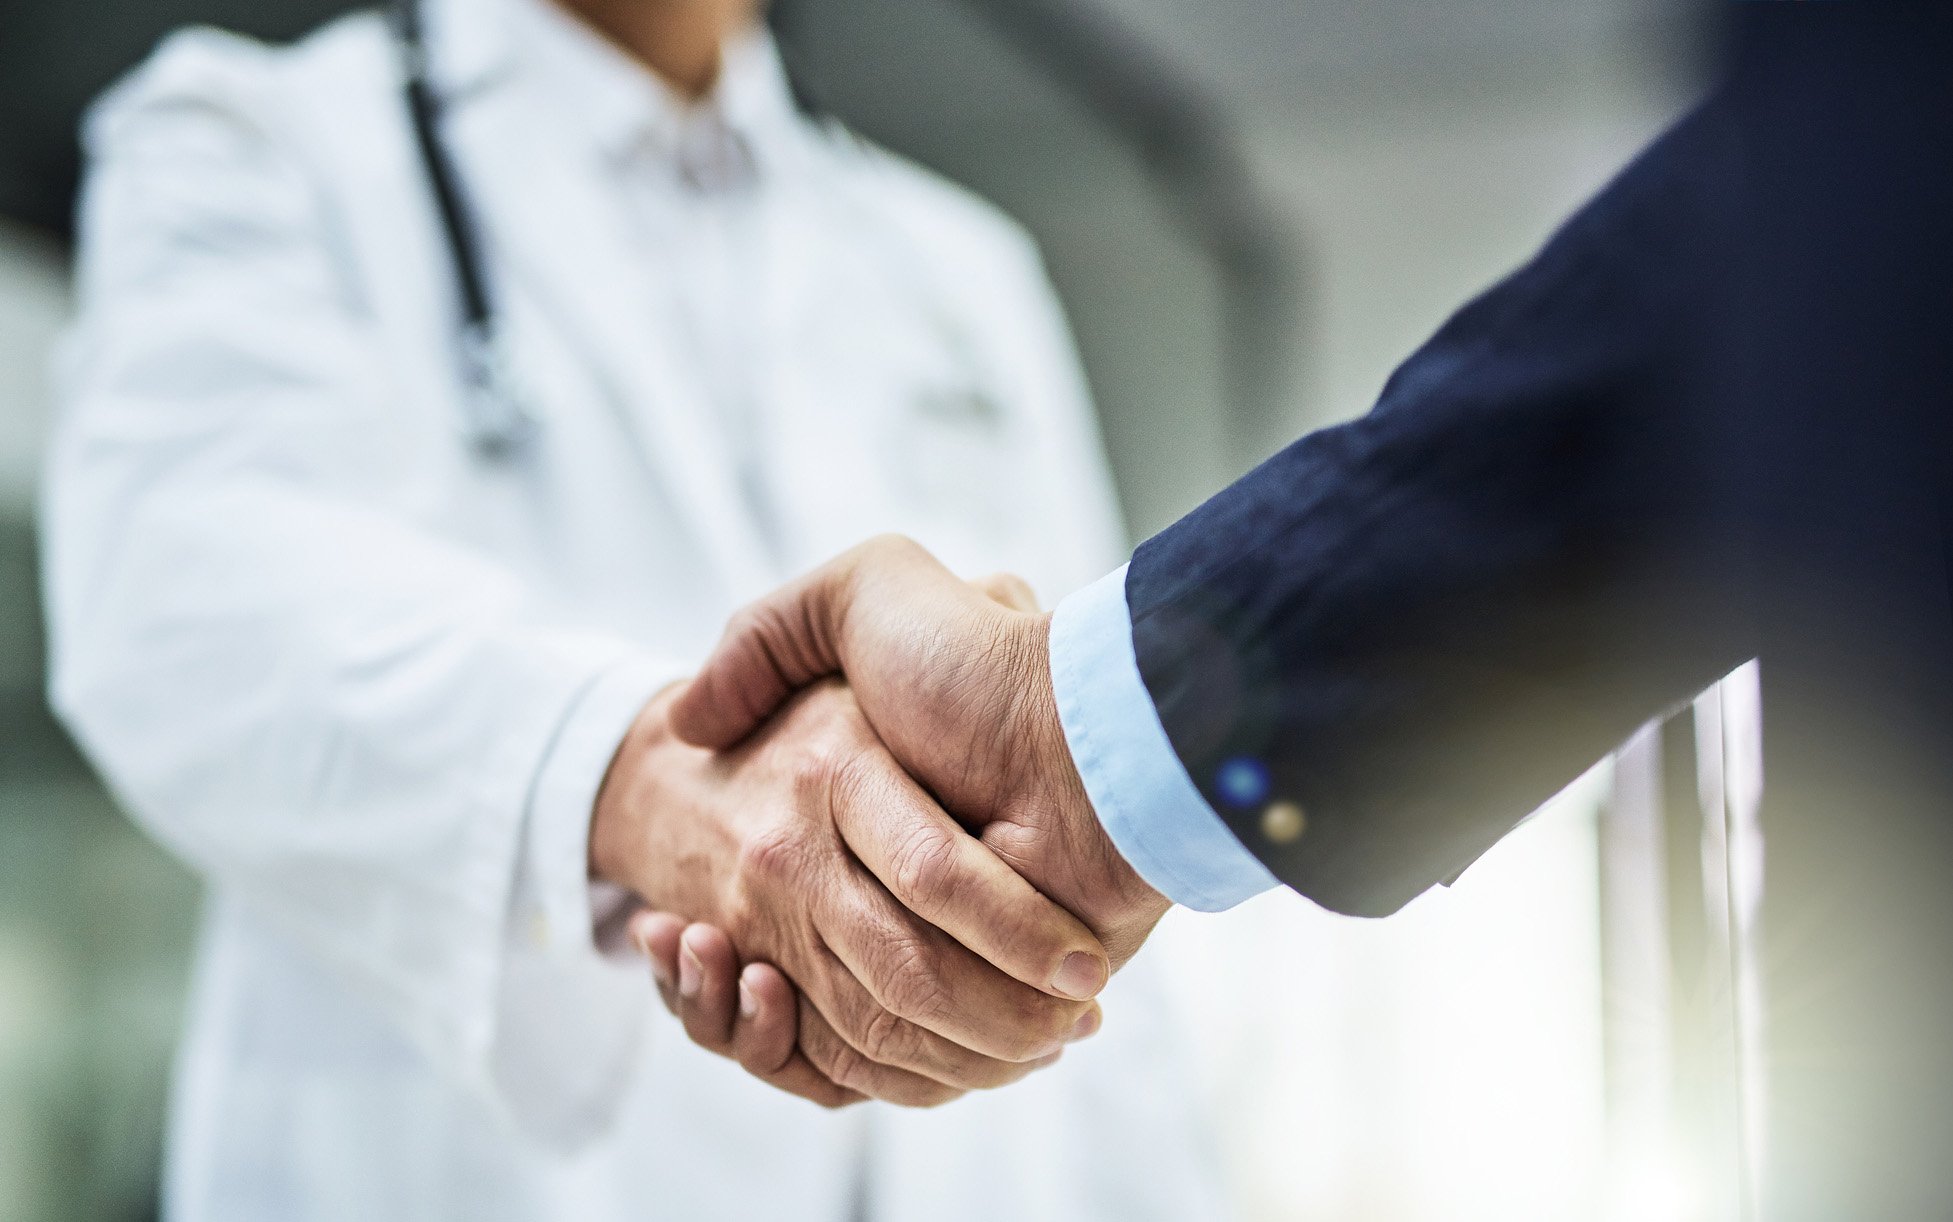 How to be Prepared for Mergers and Acquisitions in Healthcare